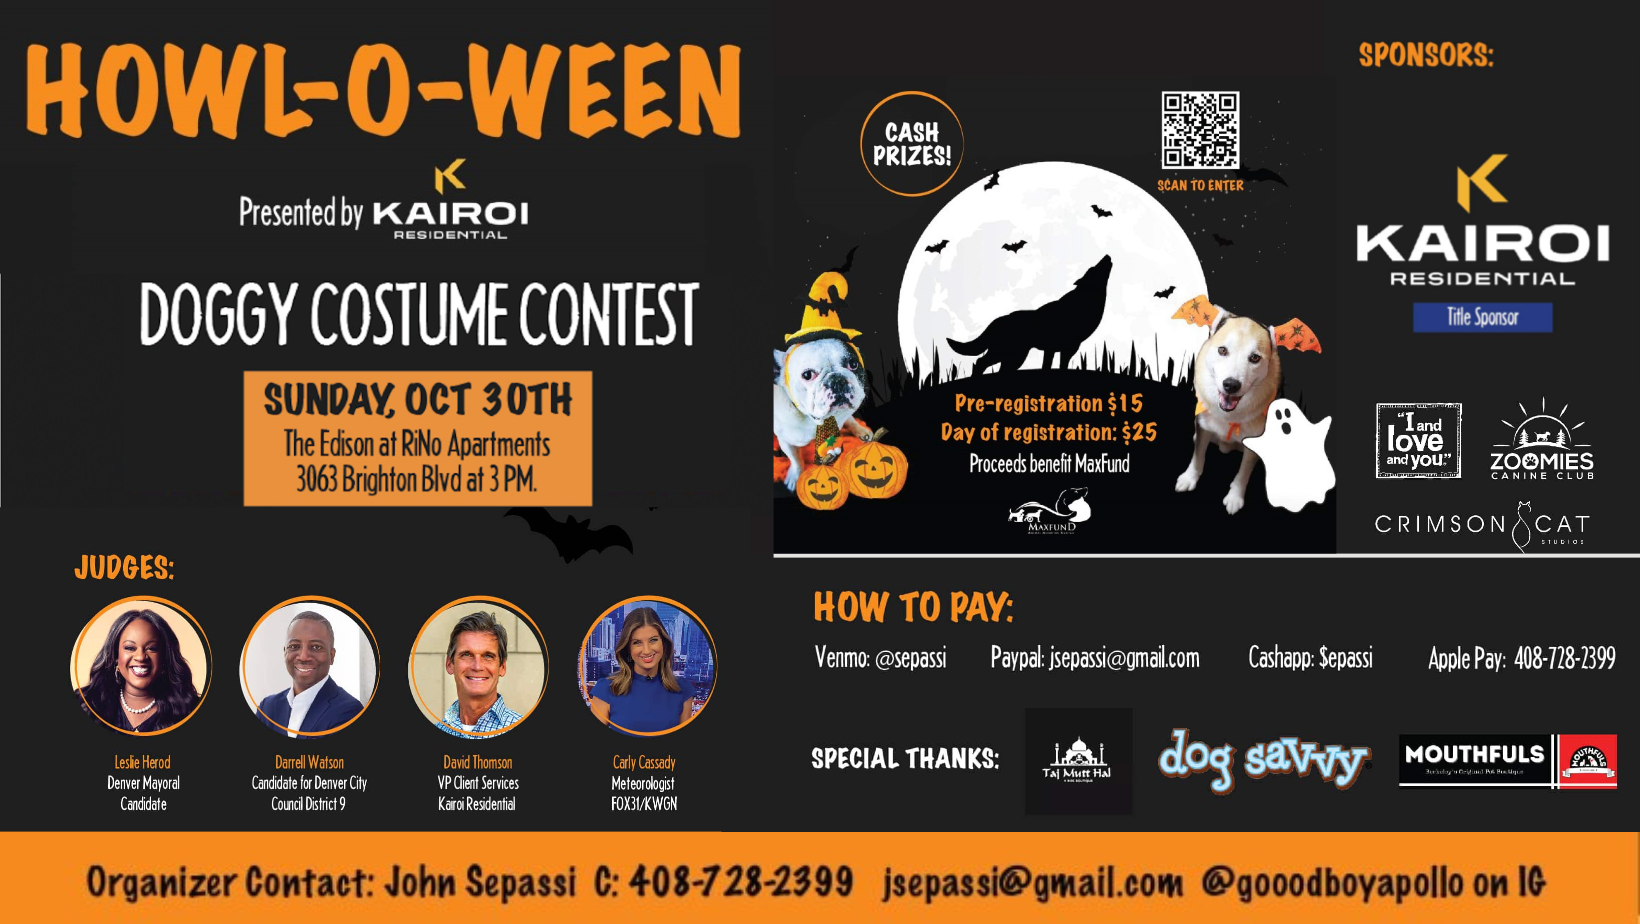 
Howl-O-Ween: Doggy Costume Contest